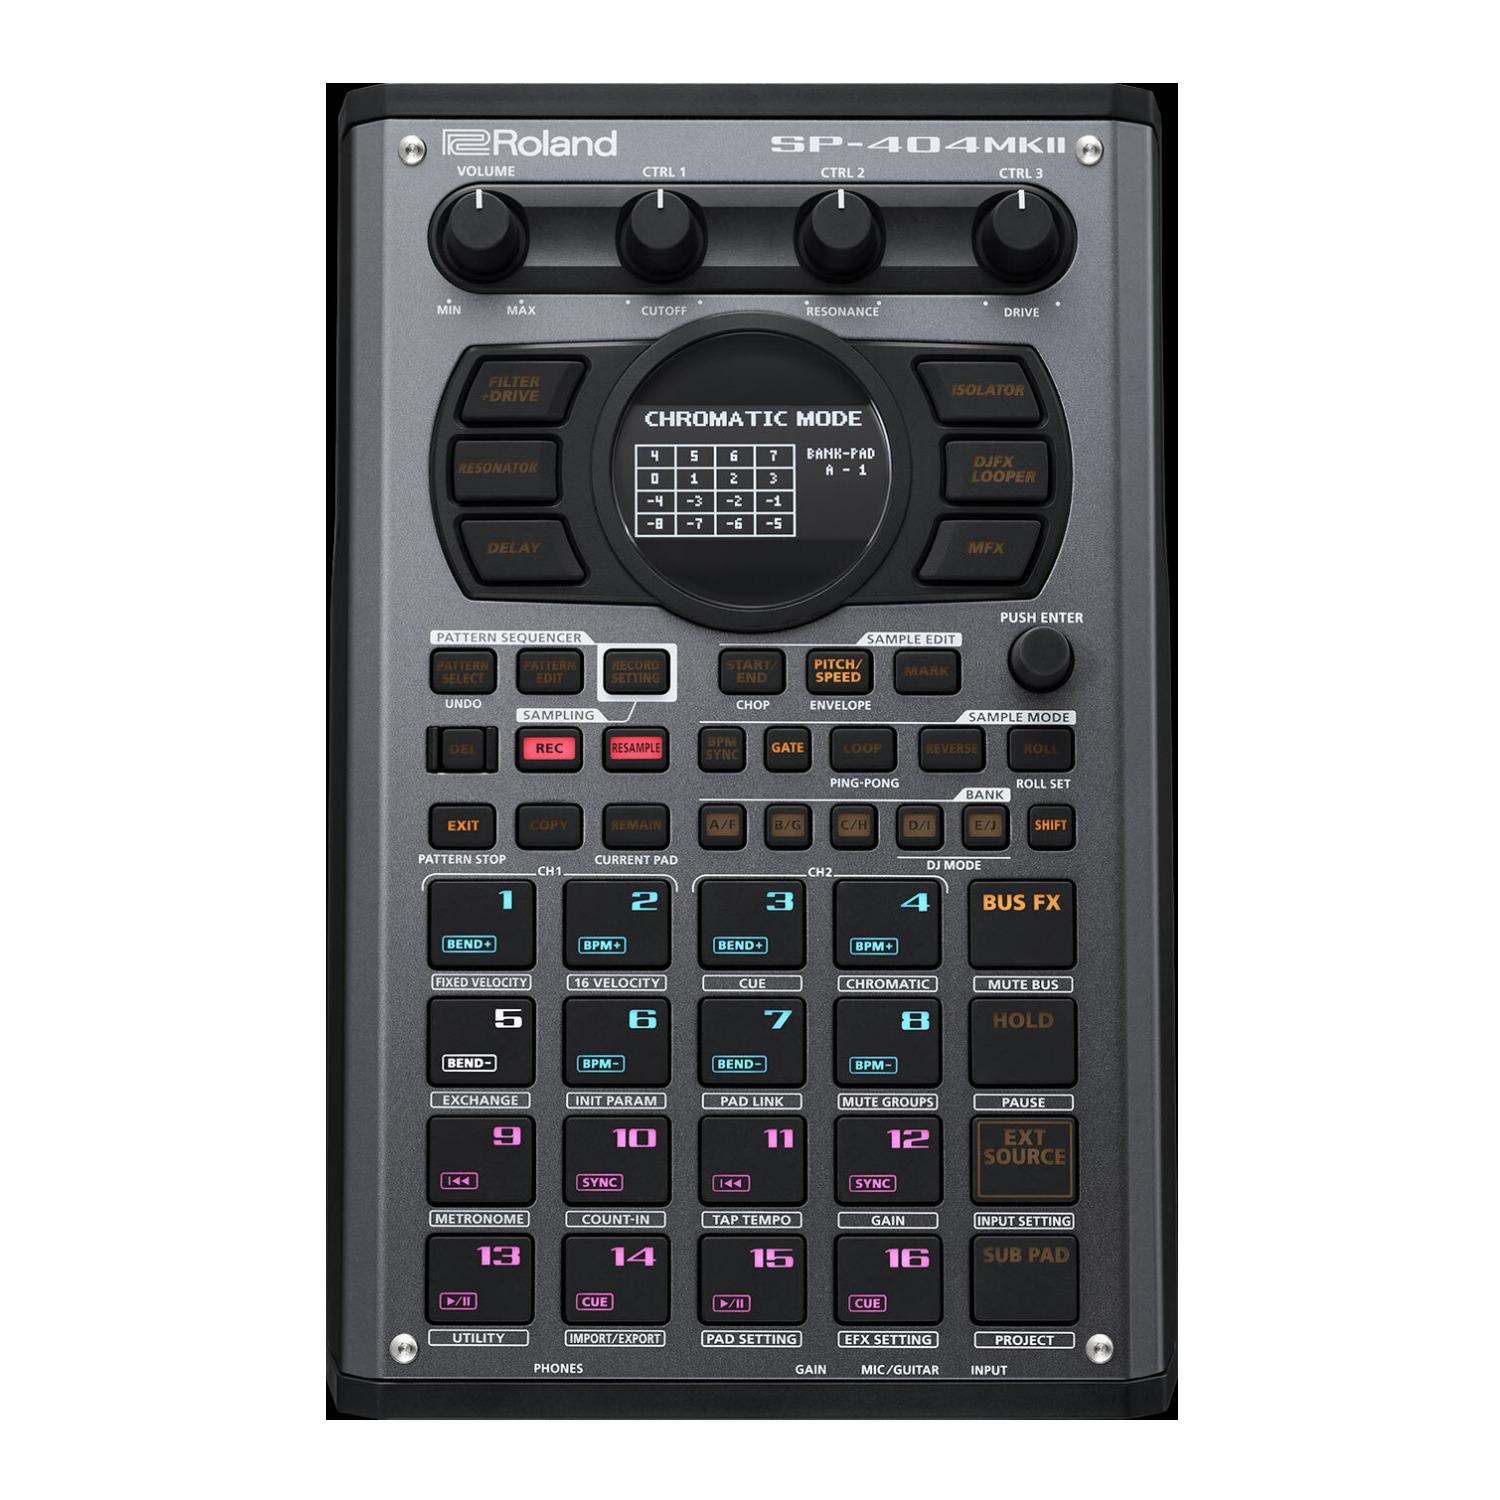 Compact Ultra-Lightweight Creative Sampler and Effector with 16 GB Internal Storage in Black - Roland SP-404MK2